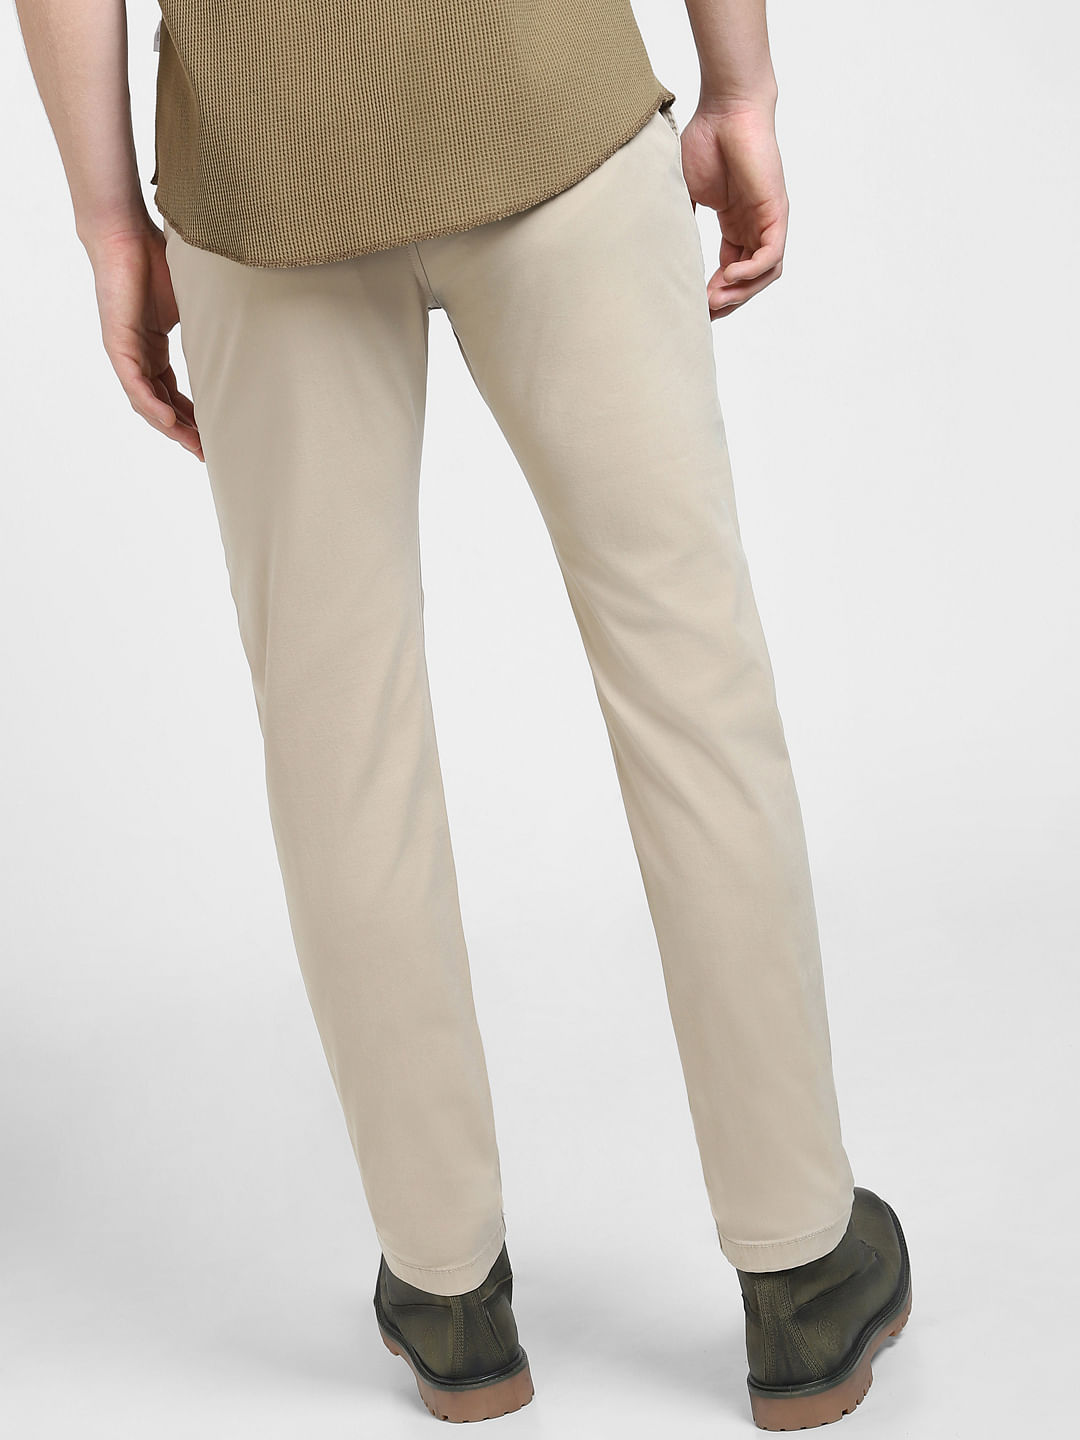 Buy Polo Ralph Lauren Men Tan Stretch Slim Fit Chino Pant Online - 798429 |  The Collective